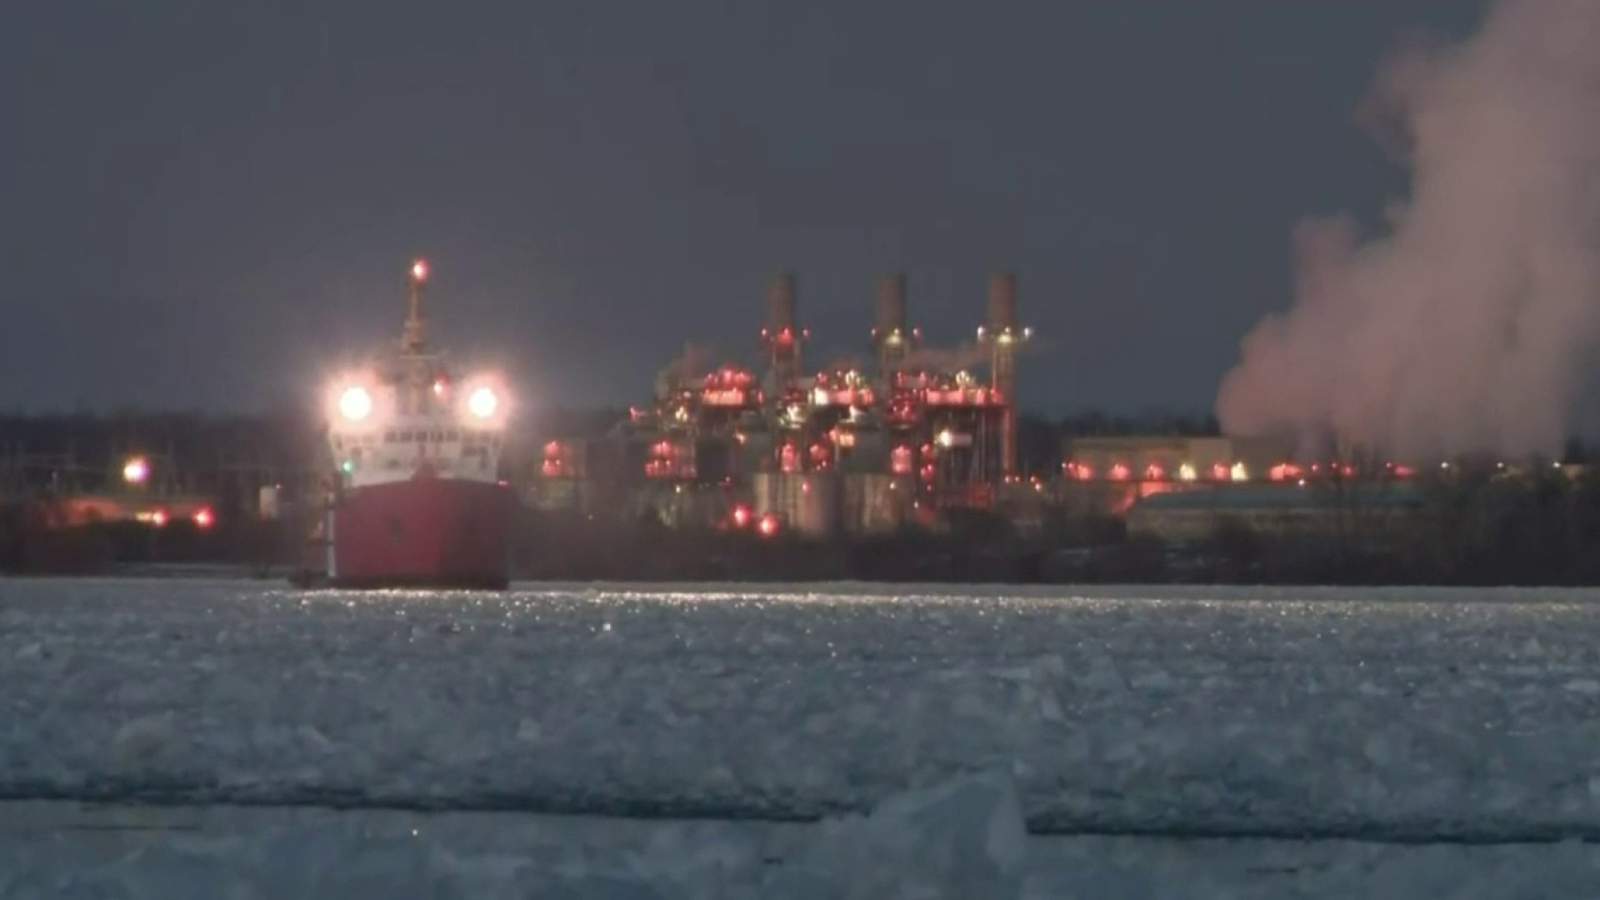 Coast Guard ice breakers deployed to St. Clair River to relieve flooding